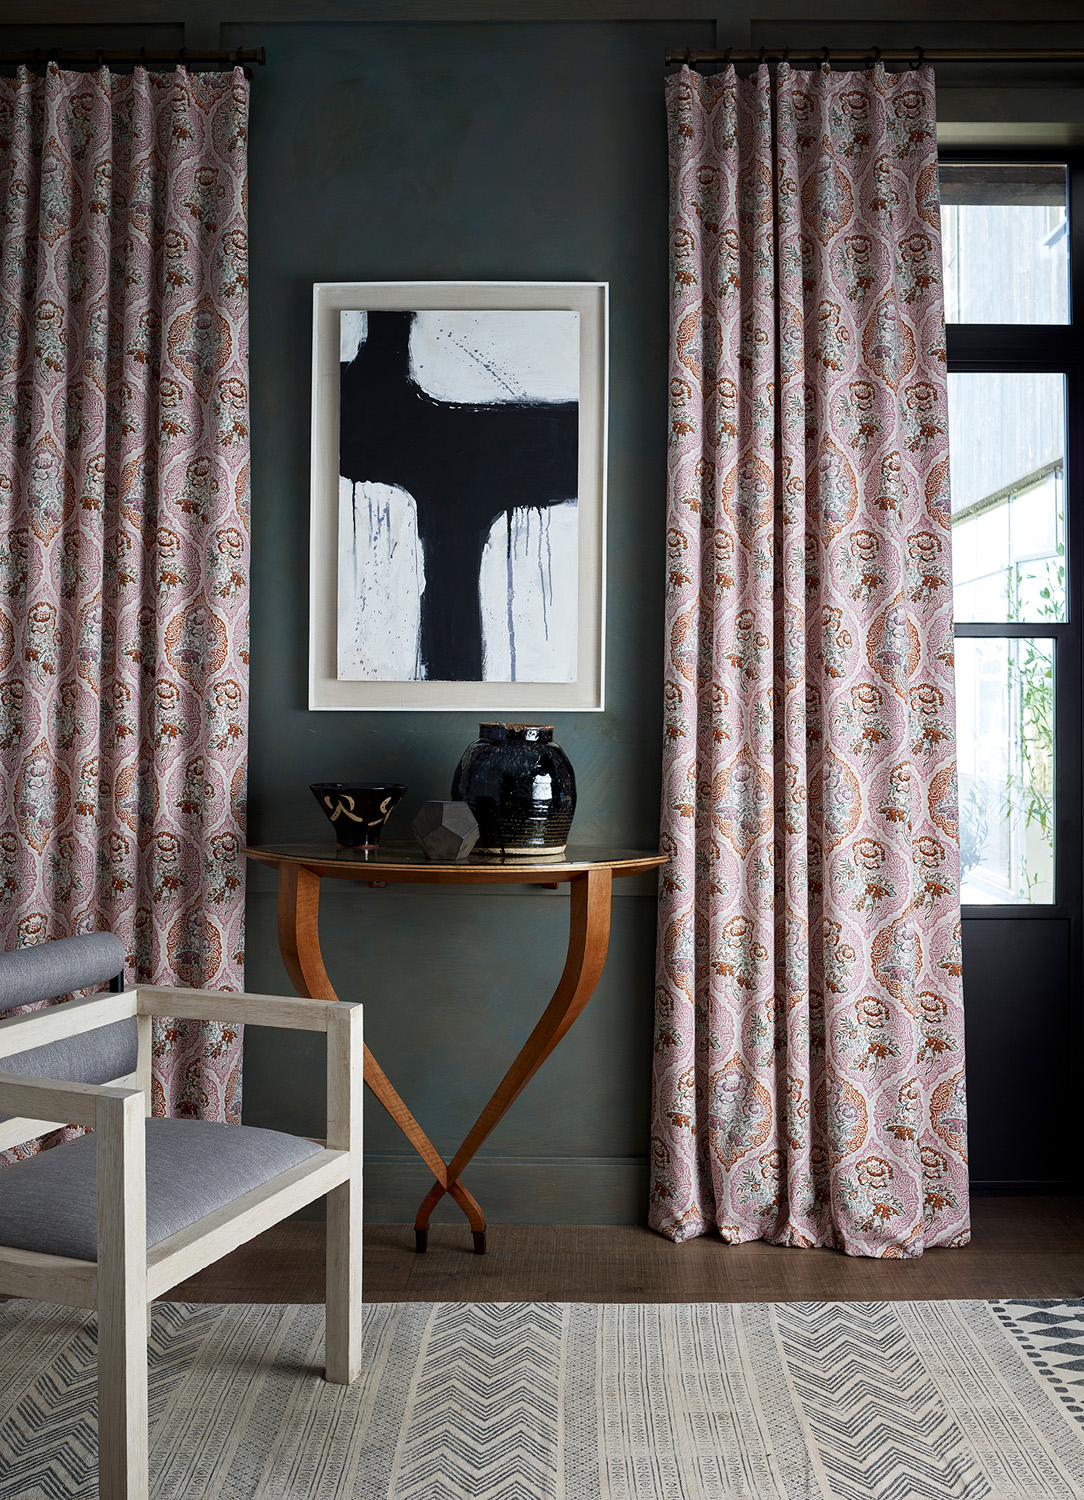 Curtains by Rapture &amp; Wright - traditional British furniture and interior design